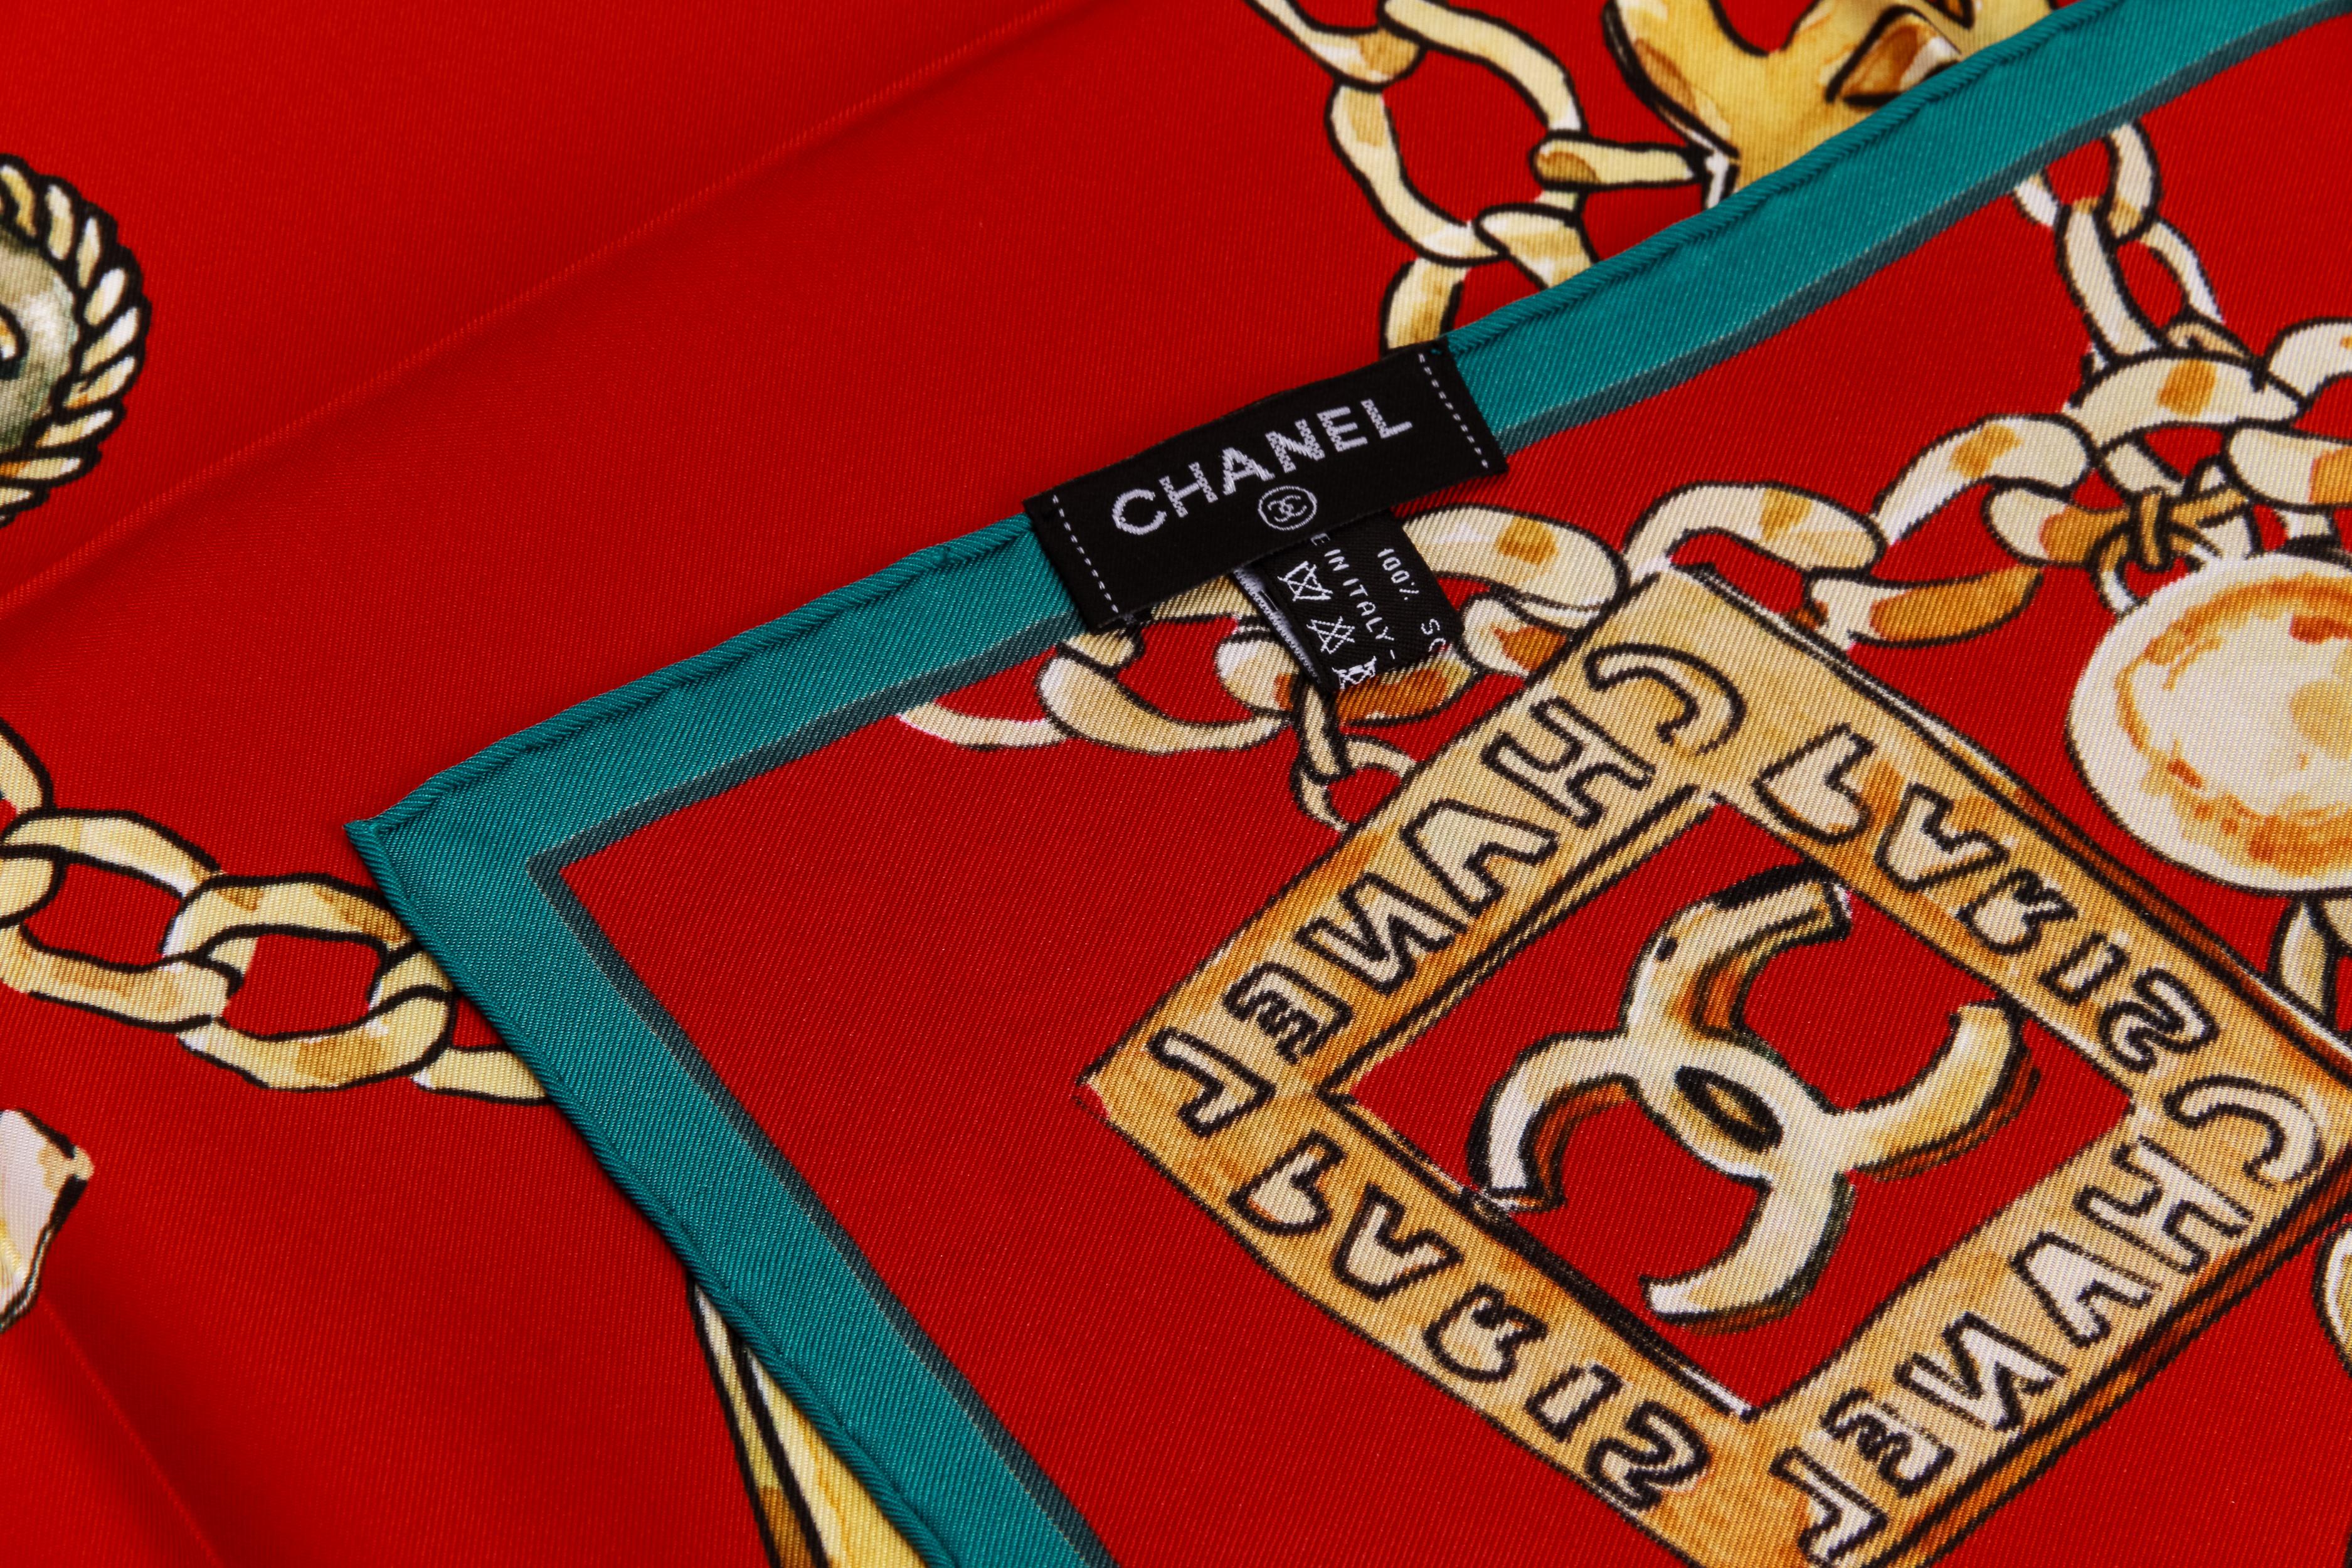 Chanel new 100% silk scarf. Iconic 70s jewelry design, gripoix and logos. Red with green trim. Care tag attached.
